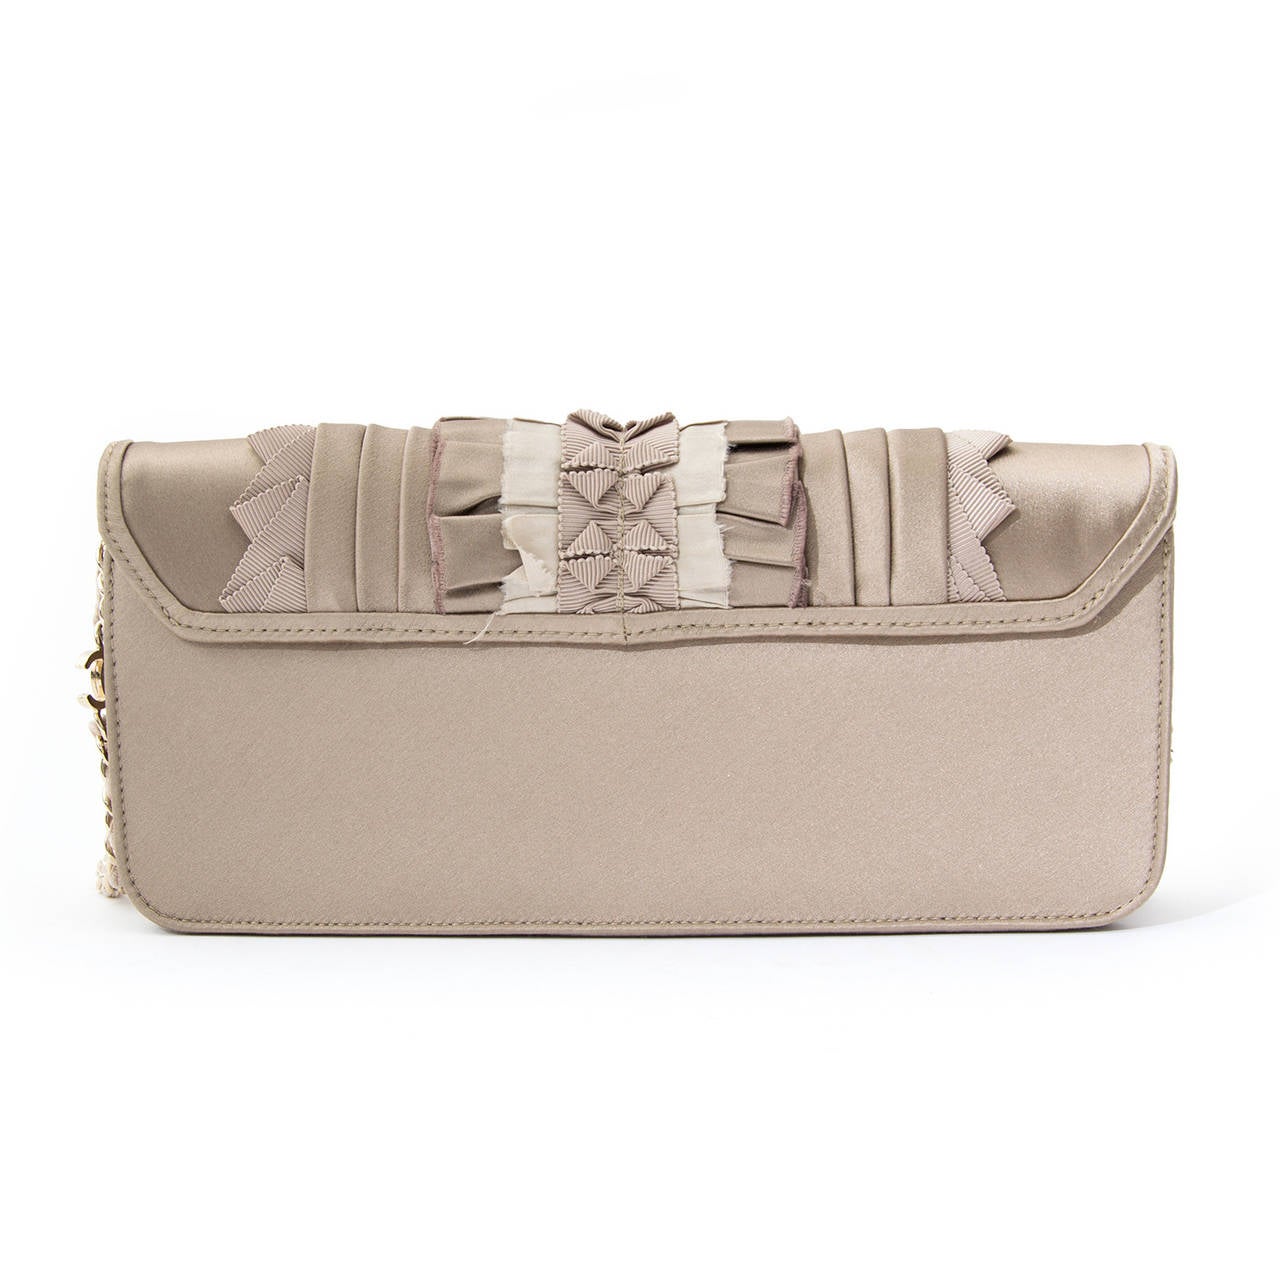 A gorgeous baguette shaped Chanel evening bag in beige and greige silks, with ruffle details. Hangs on a chain and velvet entwined strap to be carried on the shoulder or in hand like a clutch. With double C logo detail at the strap. 
Hologram